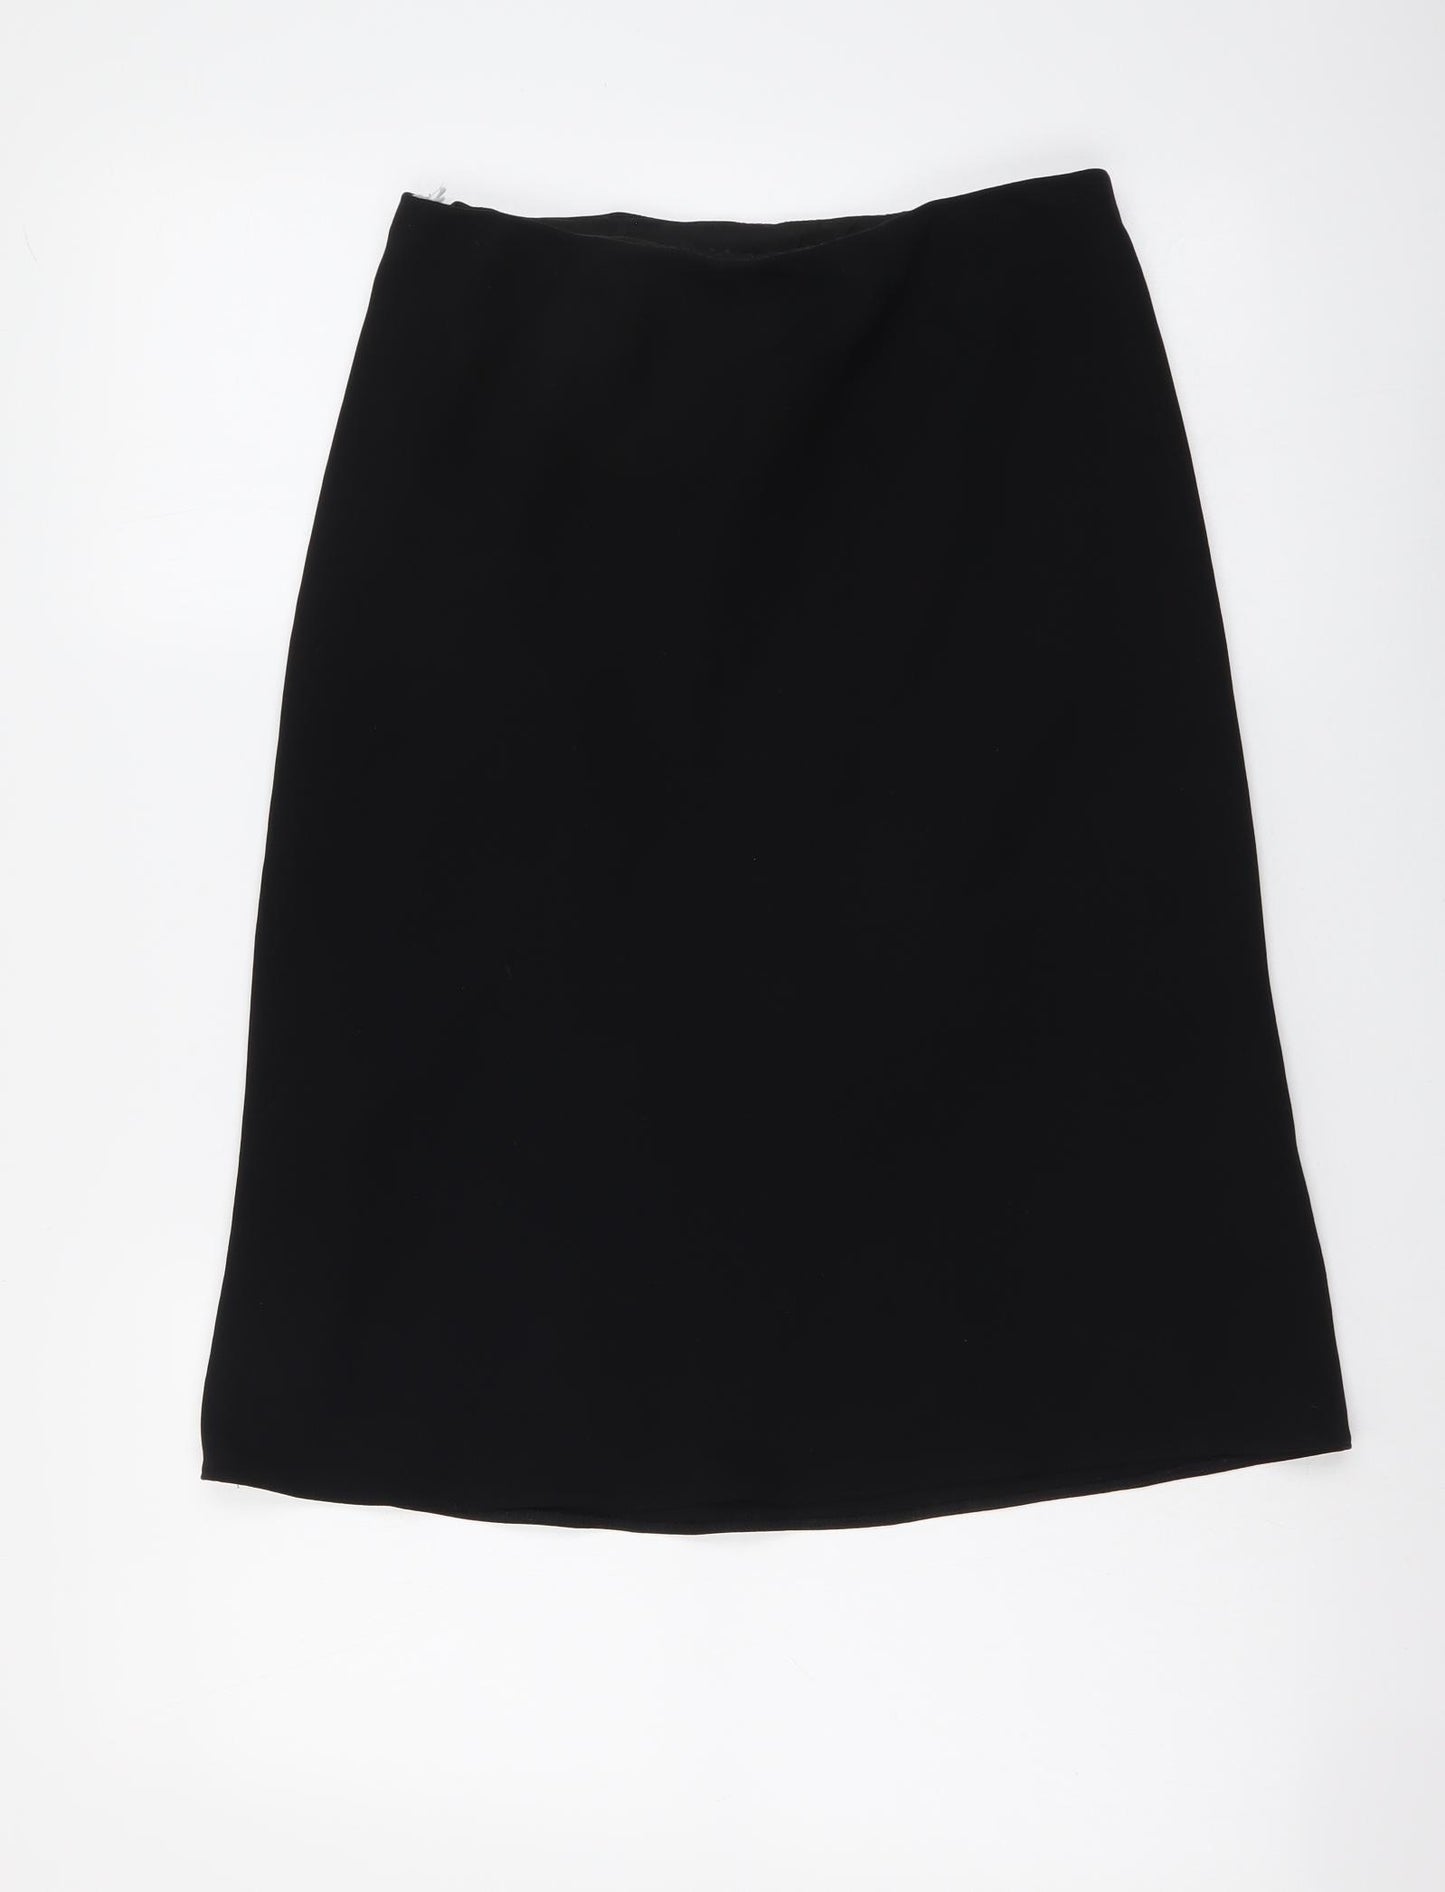 Anne Brooks Womens Black Polyester A-Line Skirt Size 10